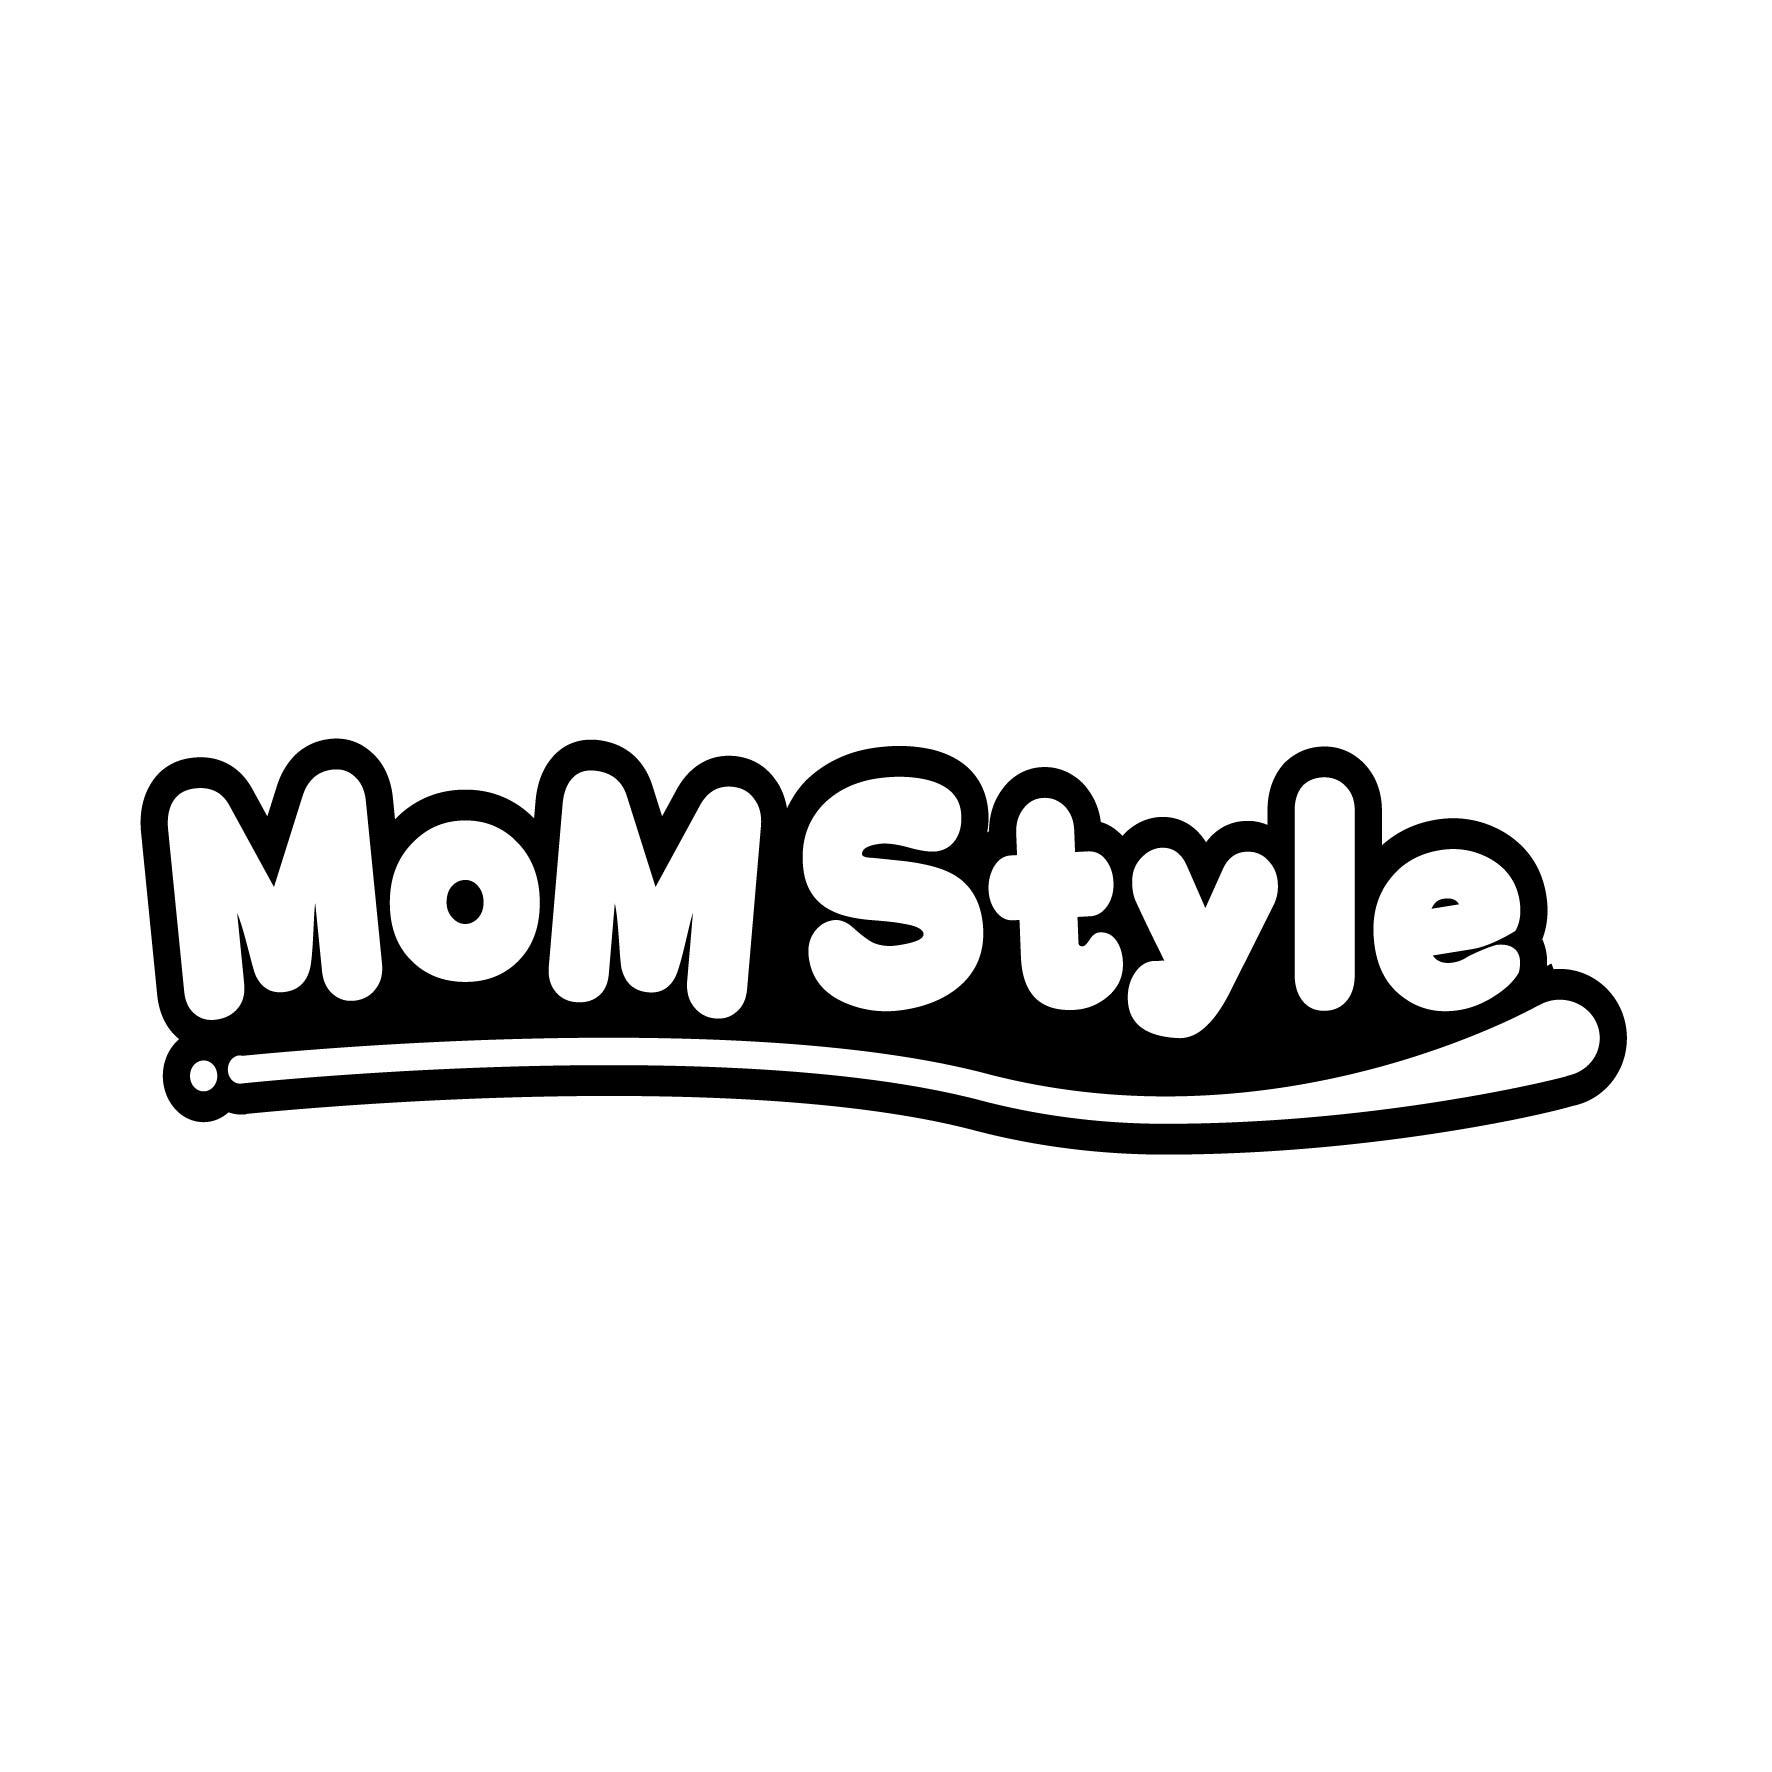 MOMSTYLE